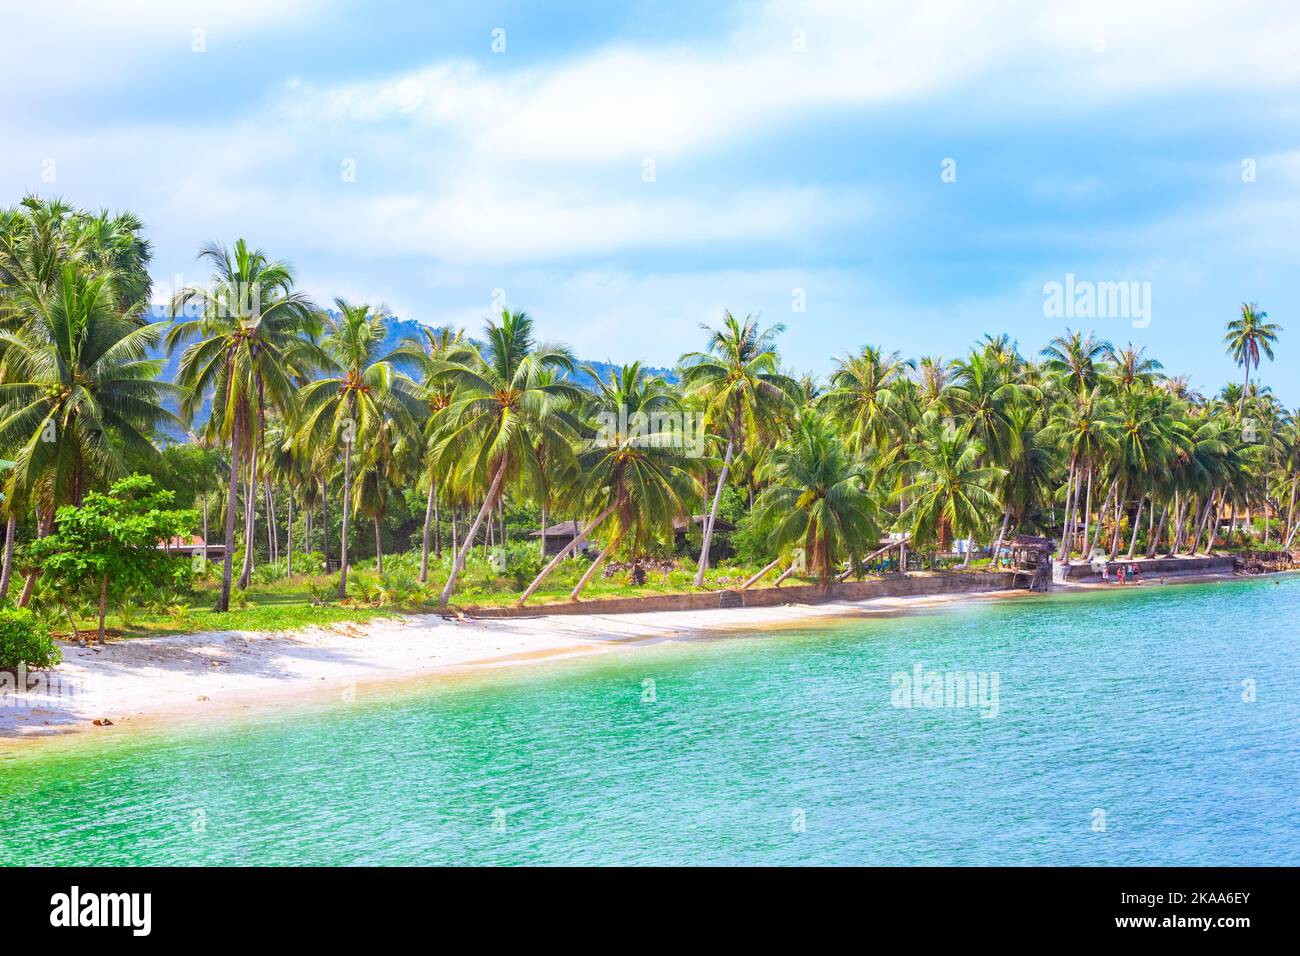 Sea tropical landscape. Coastline with a row of growing palm trees. Stock Photo